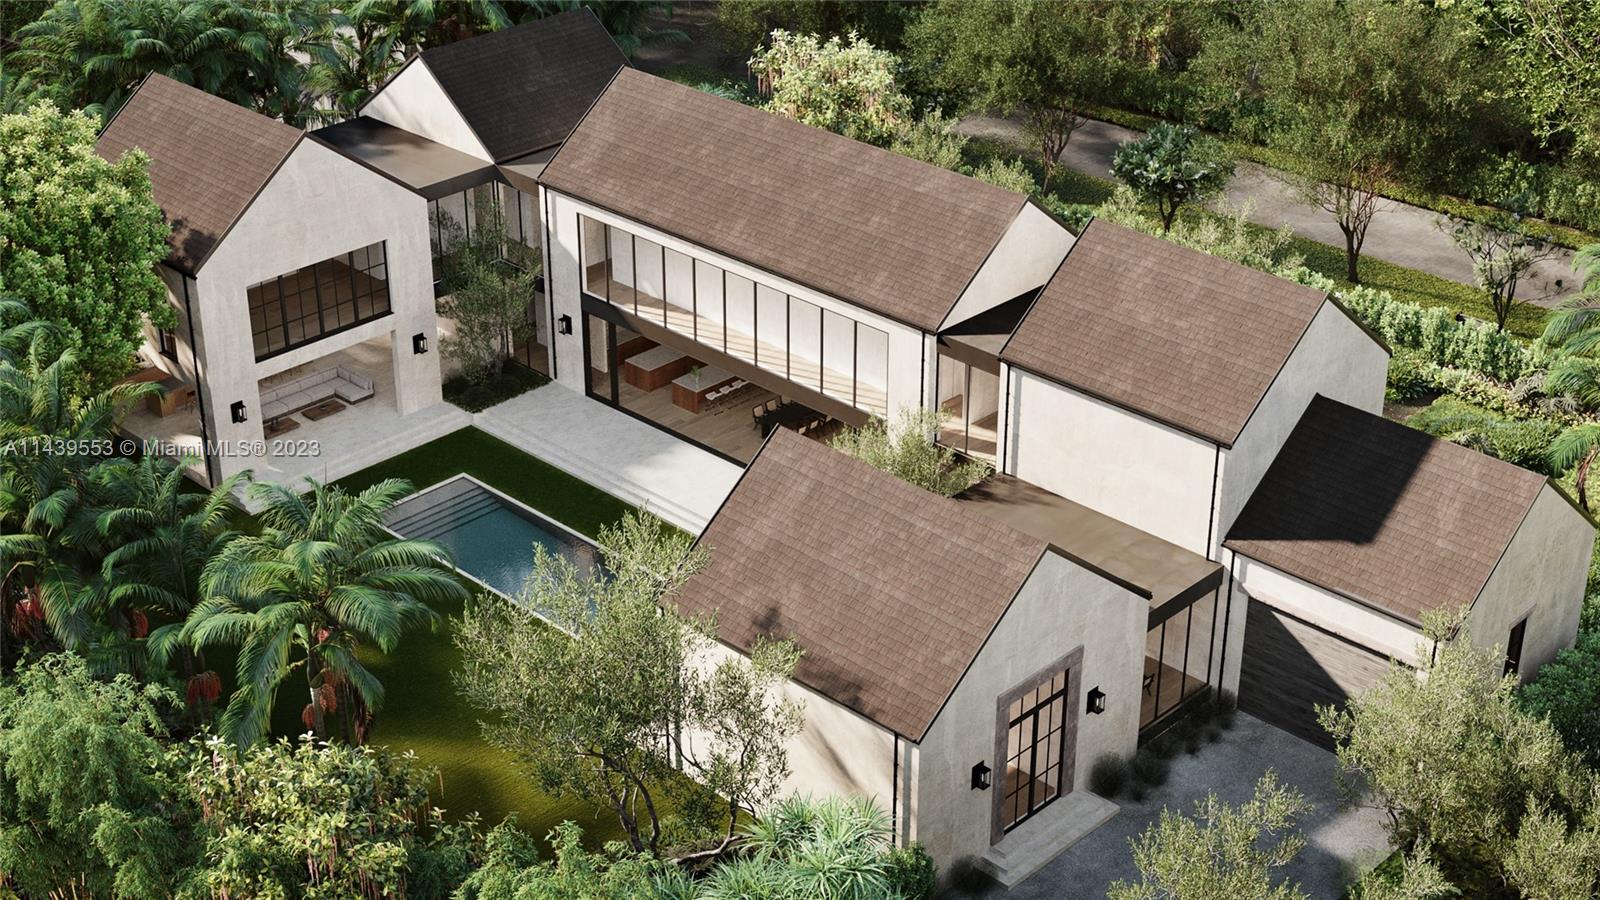 Exquisite Coral Gables residence underway.Built by MOCCA, this innovative &amp; contemporary home sets a new standard for a fresh &amp; modern take on farmhouse design.Integrating a seamless indoor/outdoor living experience,accentuating floor to ceiling glass, natural wood elements &amp; stone features to blend the immaculate architecture &amp; expressive details.Over 9,300SF this home includes 6bd/6ba/2hb w/clean lines &amp; custom finishes.Featuring a chefs kitchen w/a neutral palette, expansive liv. spaces, &amp; stunning primary suite; all overlooking the manicured gardens &amp; inviting exterior areas.This refined retreat highlights private &amp; serene lounging, summer kitchen, picturesque pool &amp;more.Uniquely designed,this home encompasses luxury living w/flawless craftsmanship &amp; unparalleled attention to detail.